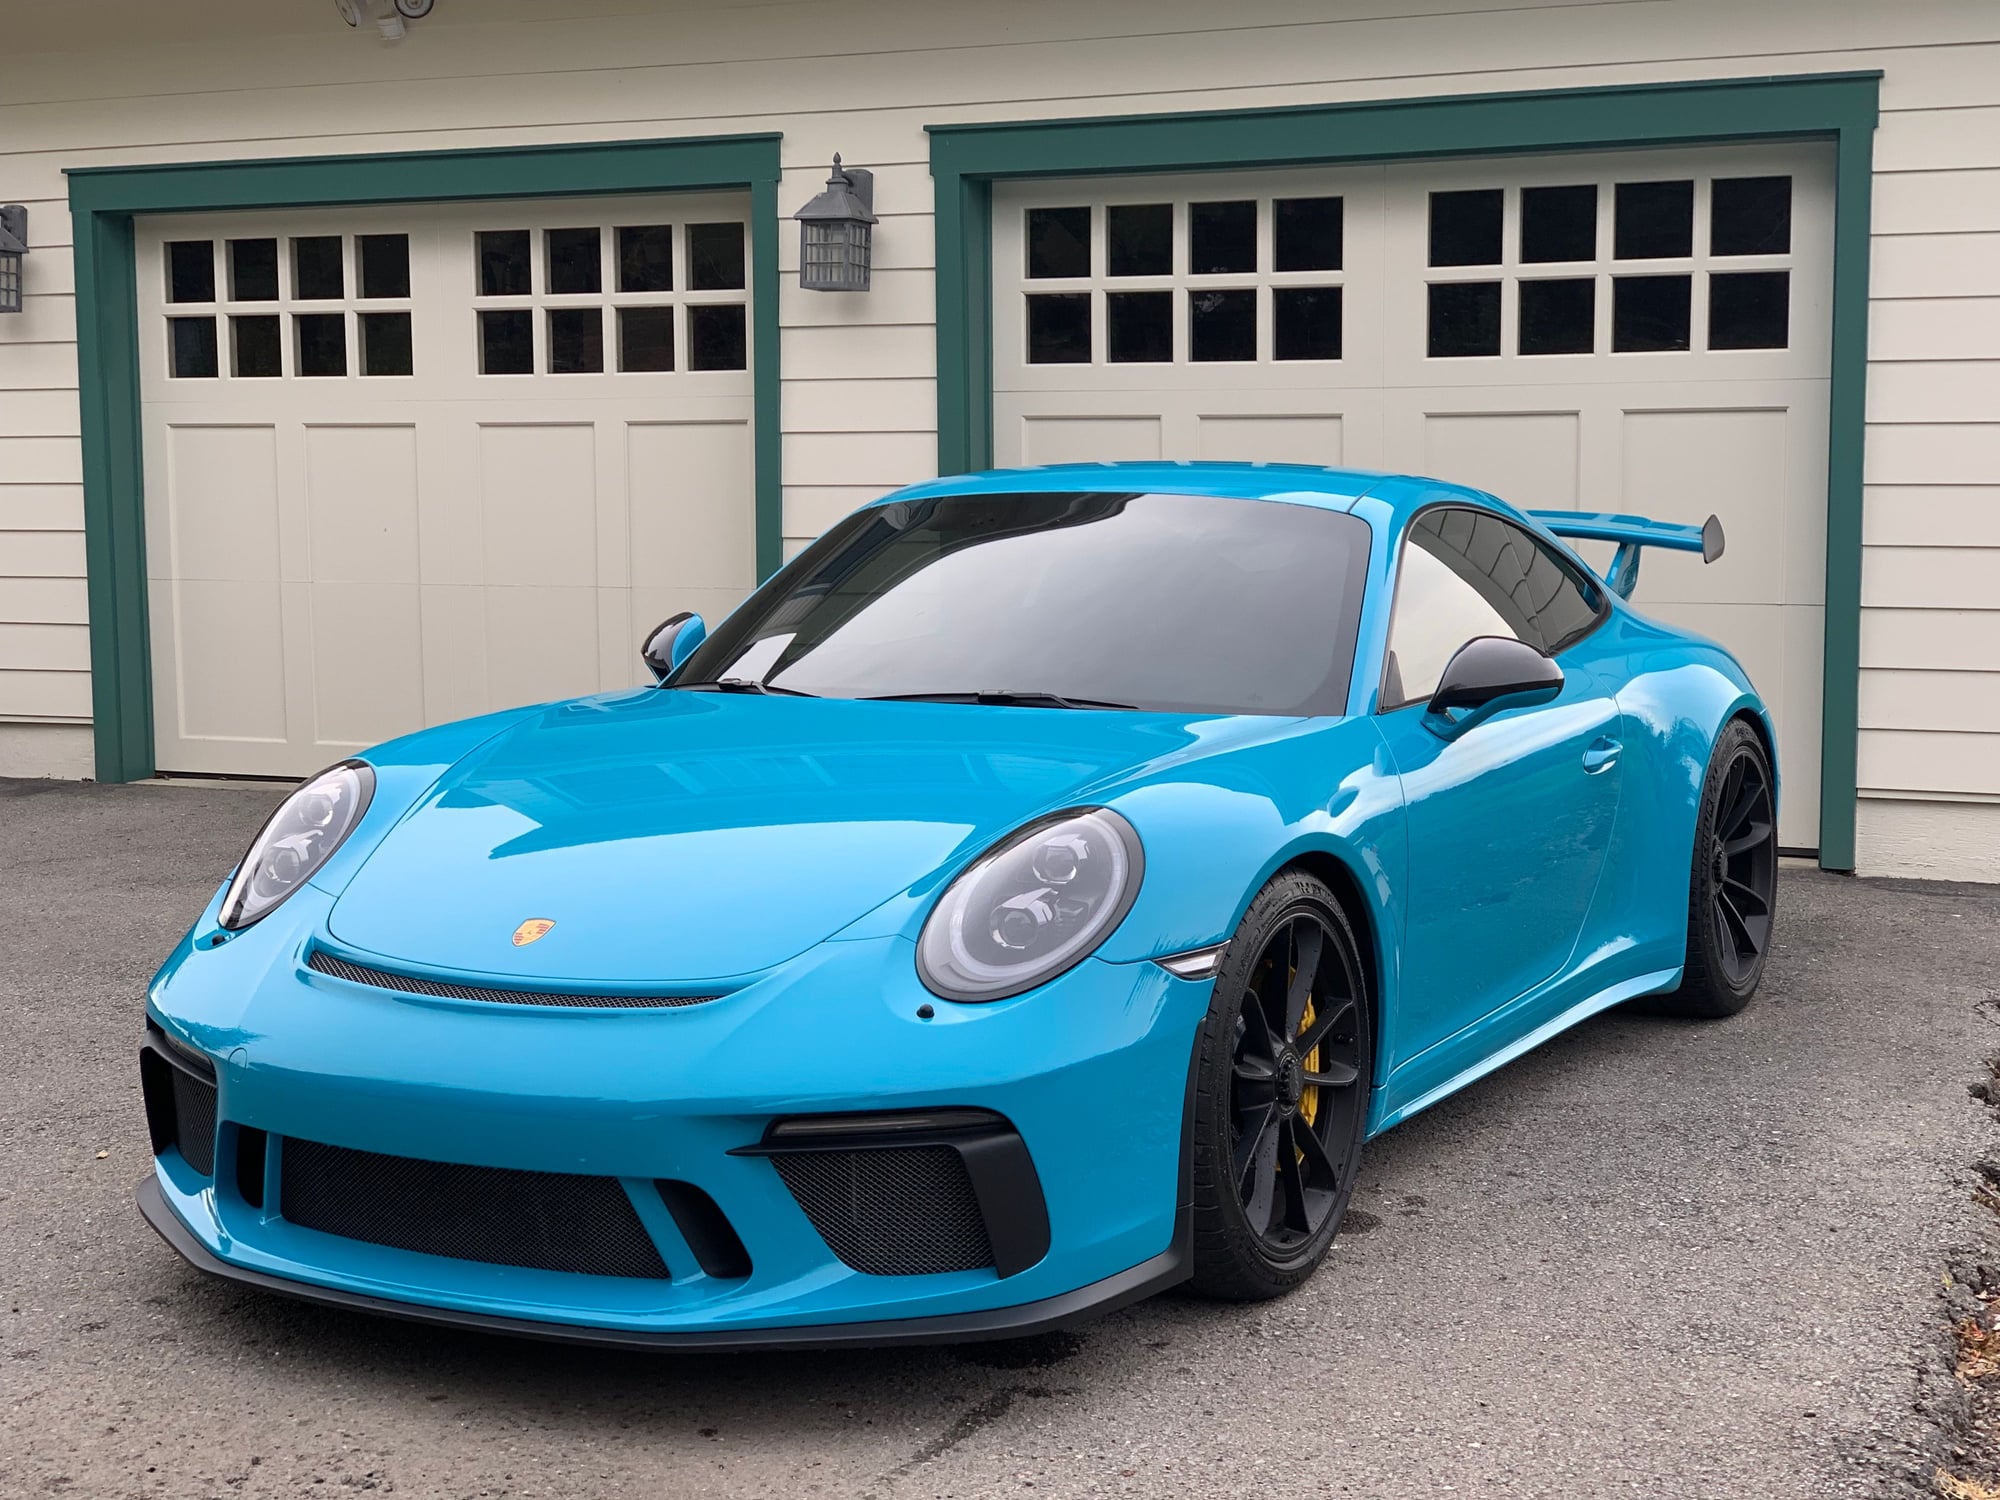 2018 Porsche GT3 - Miami Blue - Well Optioned - Manual - GT3 - Used - VIN WP0AC2A98JS174280 - 9,100 Miles - 6 cyl - 2WD - Manual - Coupe - Blue - San Francisco, CA 94110, United States